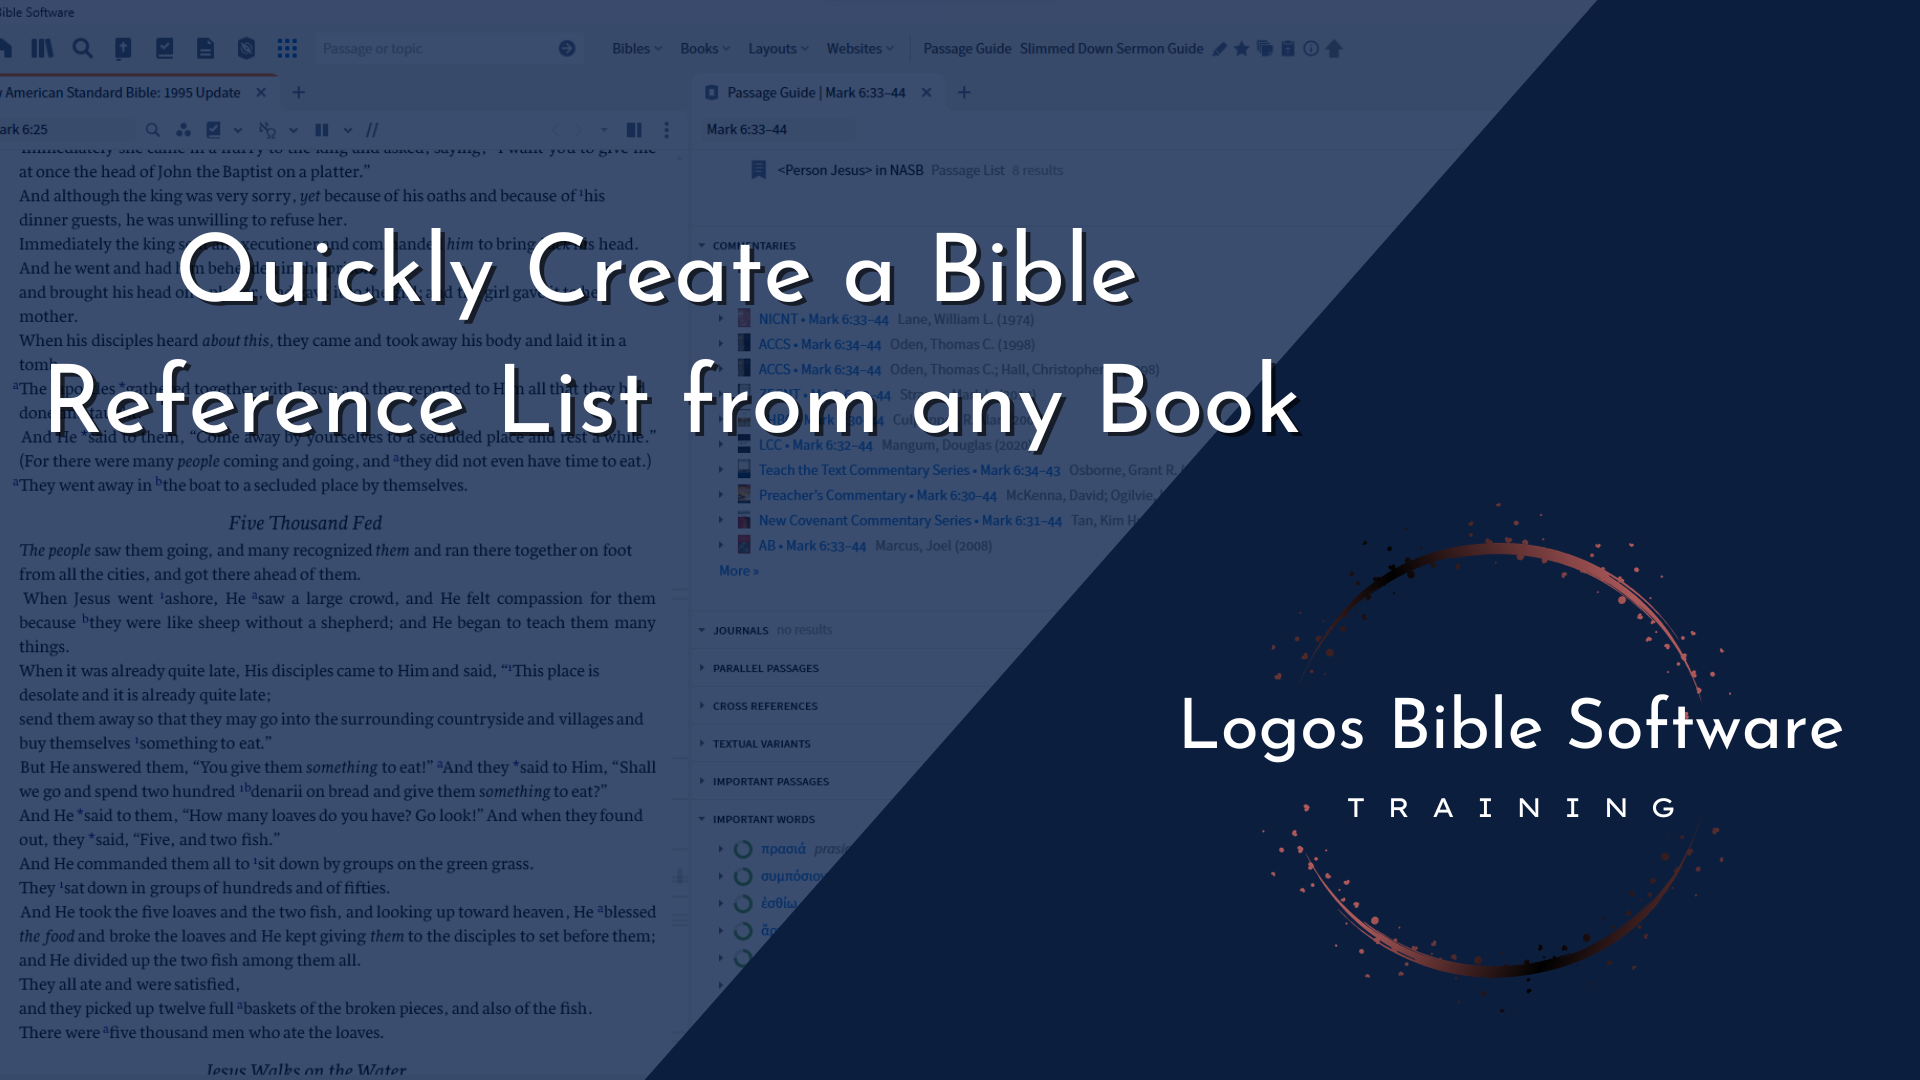 Quickly Create a Bible Reference List from any Book in Your Library